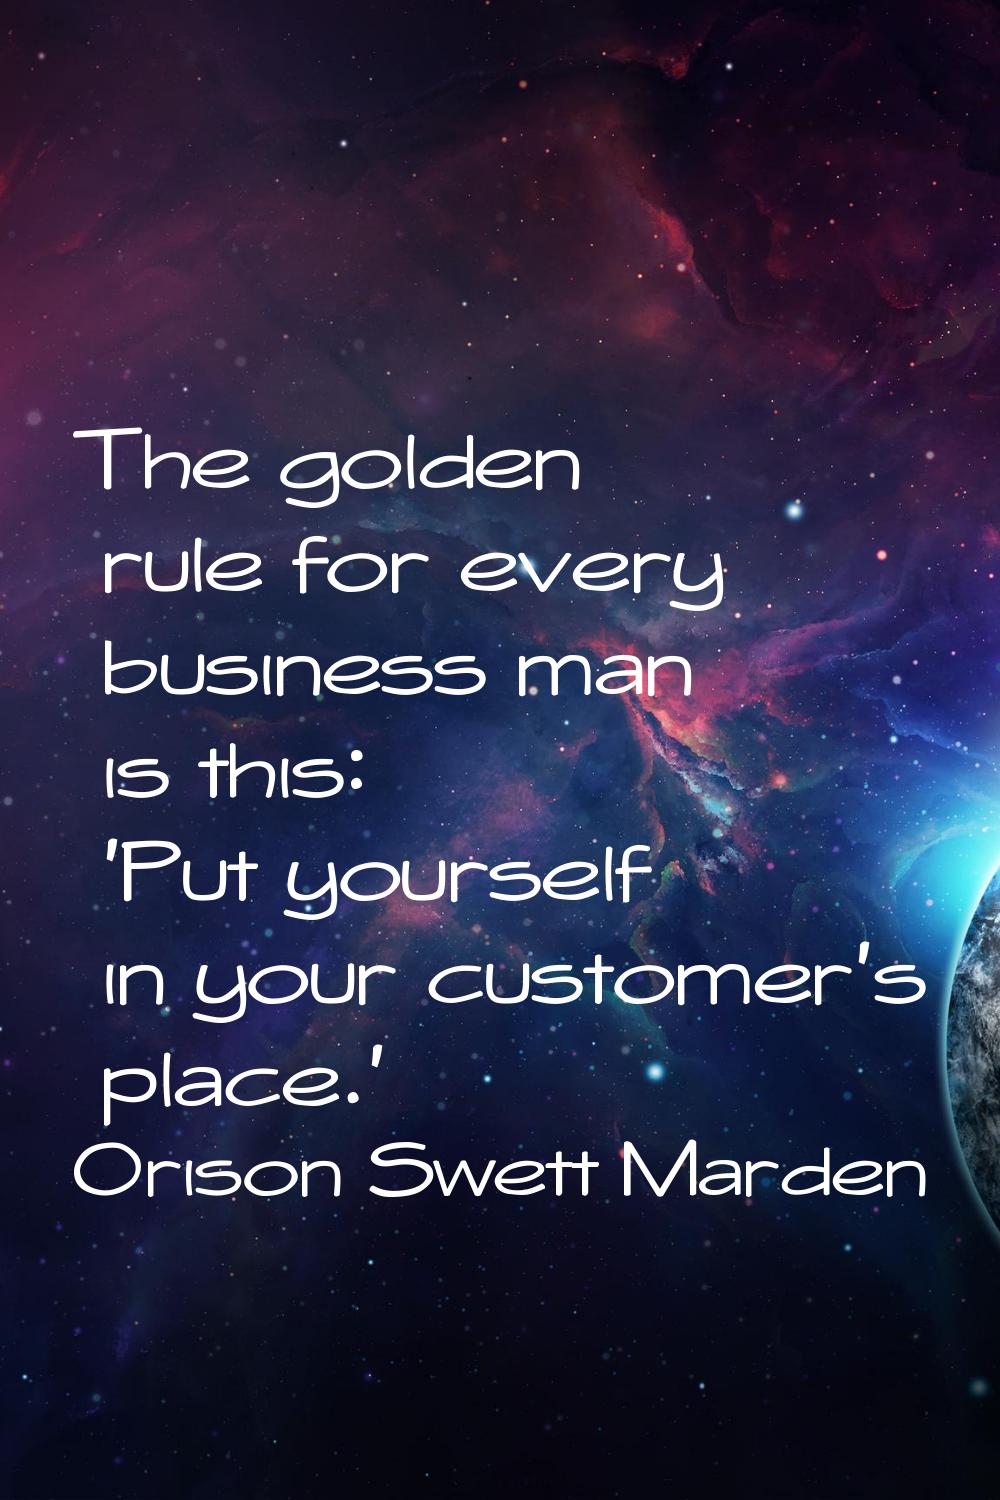 The golden rule for every business man is this: 'Put yourself in your customer's place.'